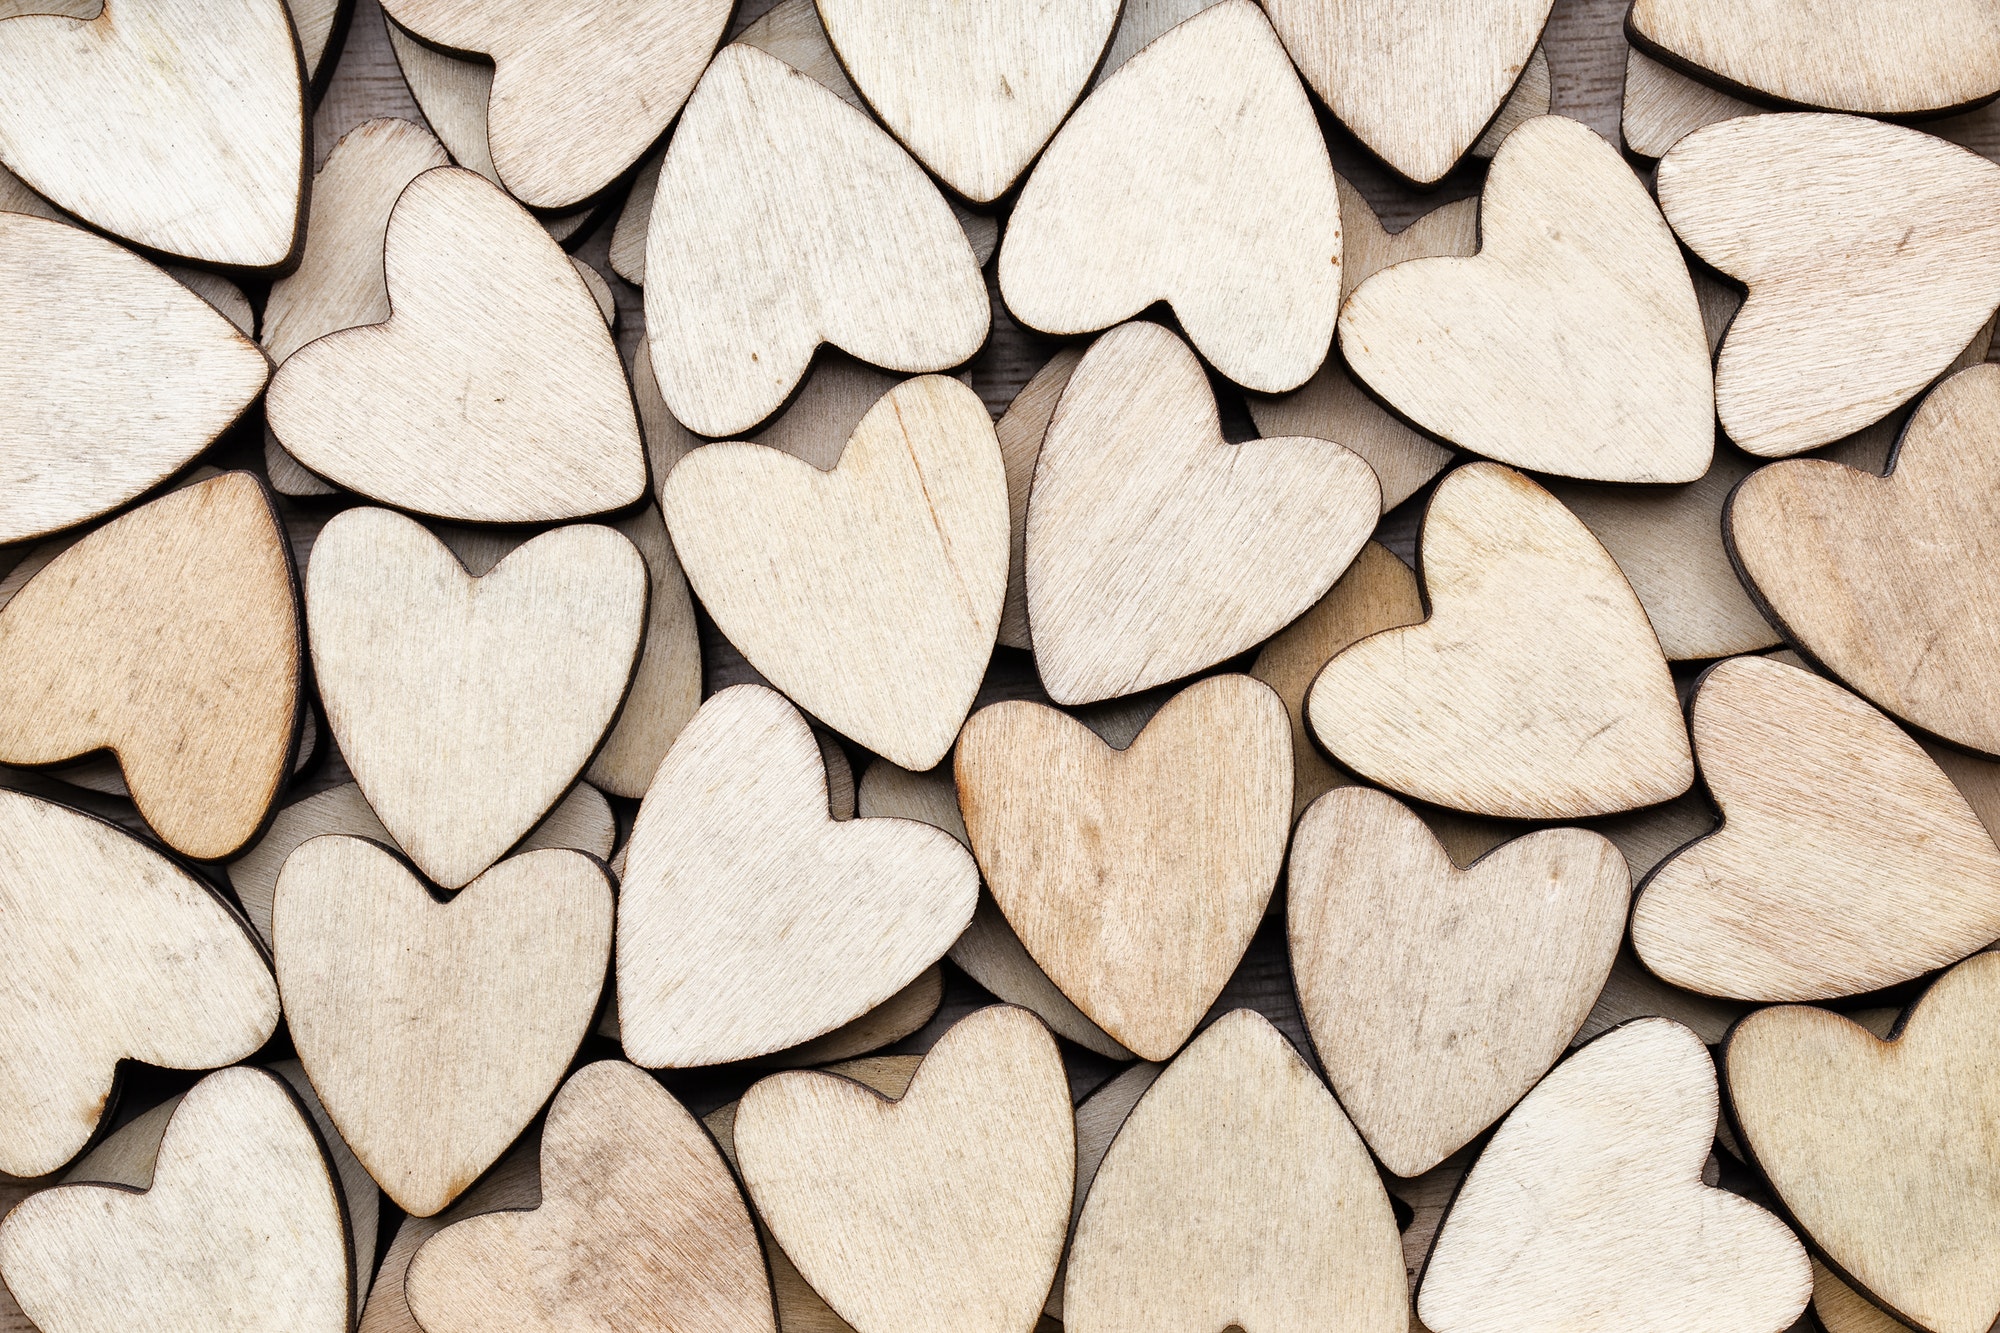 Wooden hearts, on the heart background.